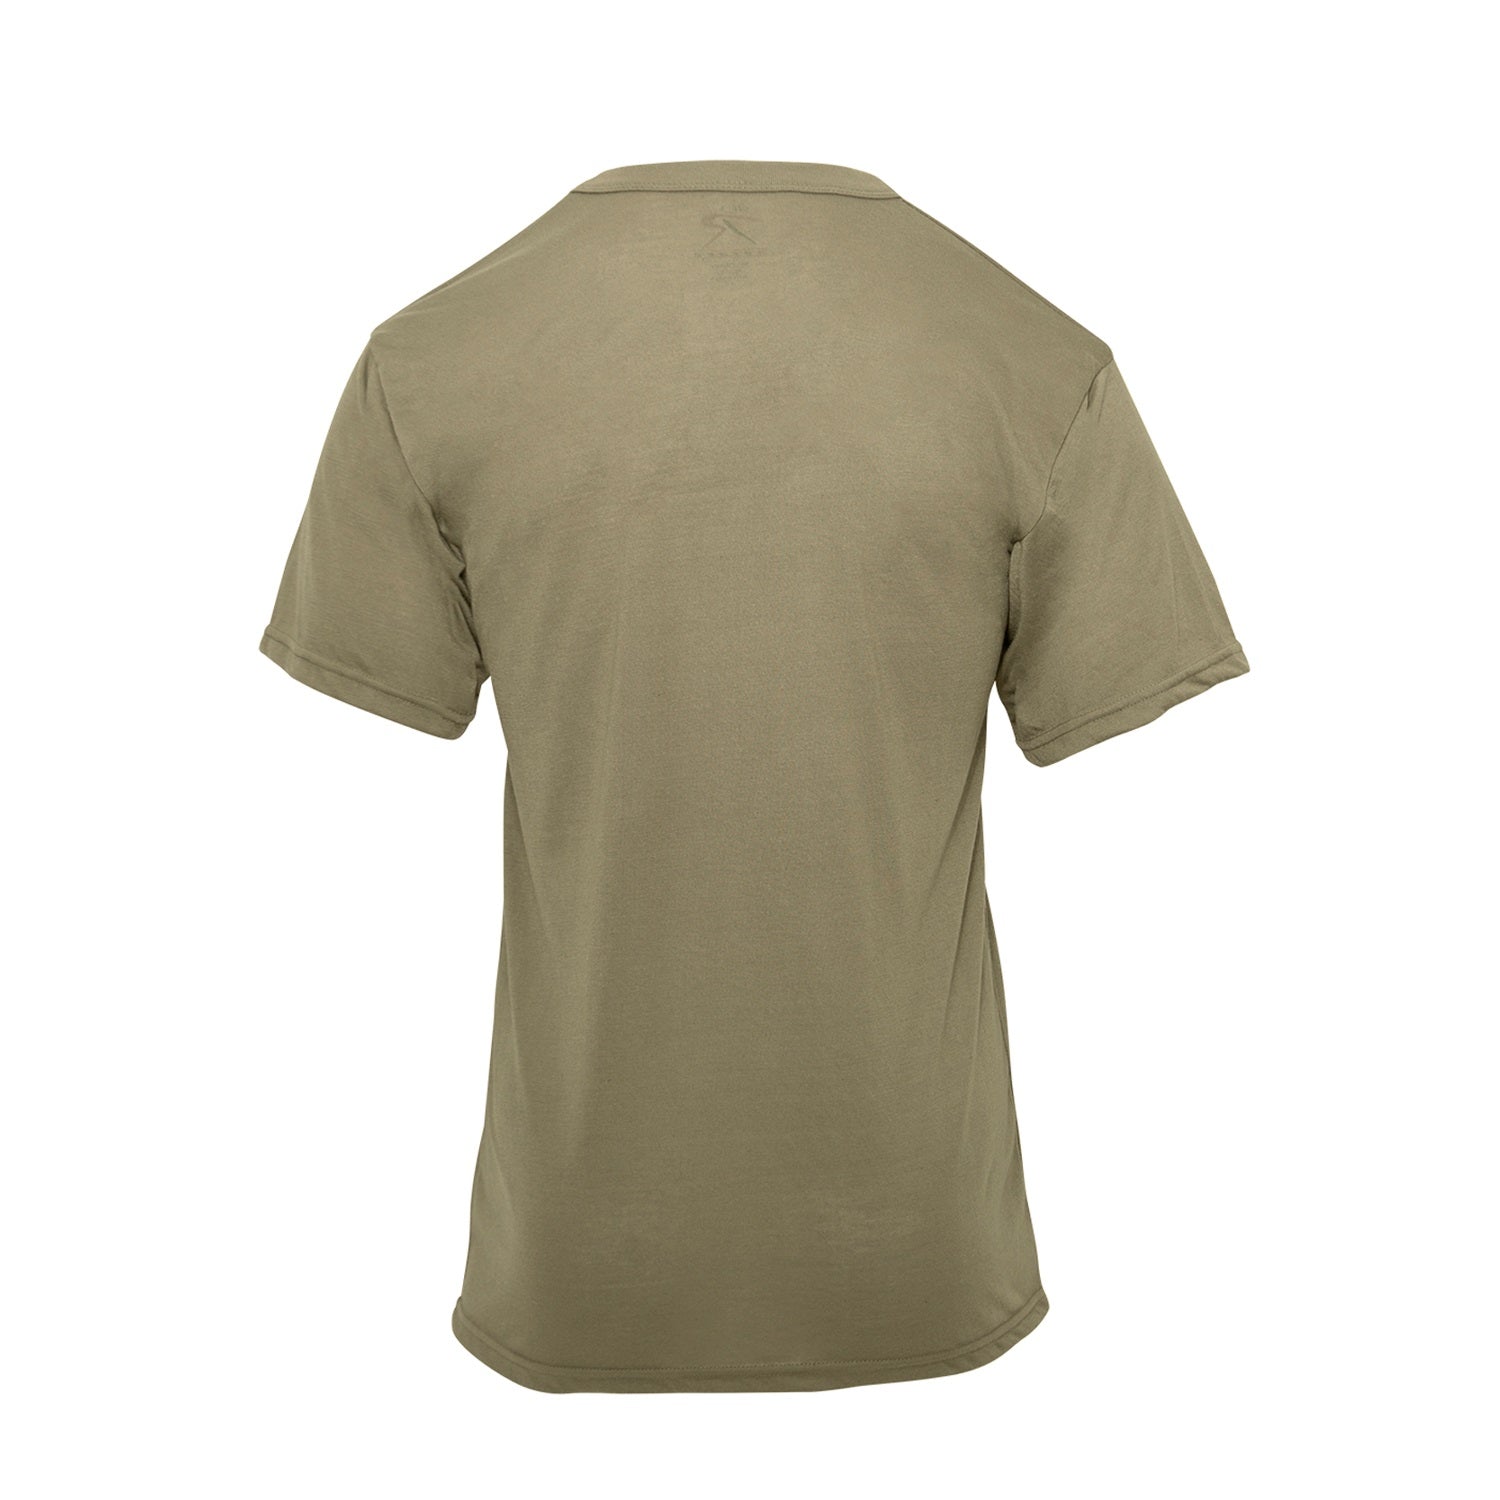 Rothco Moisture Wicking T-Shirts Coyote Brown